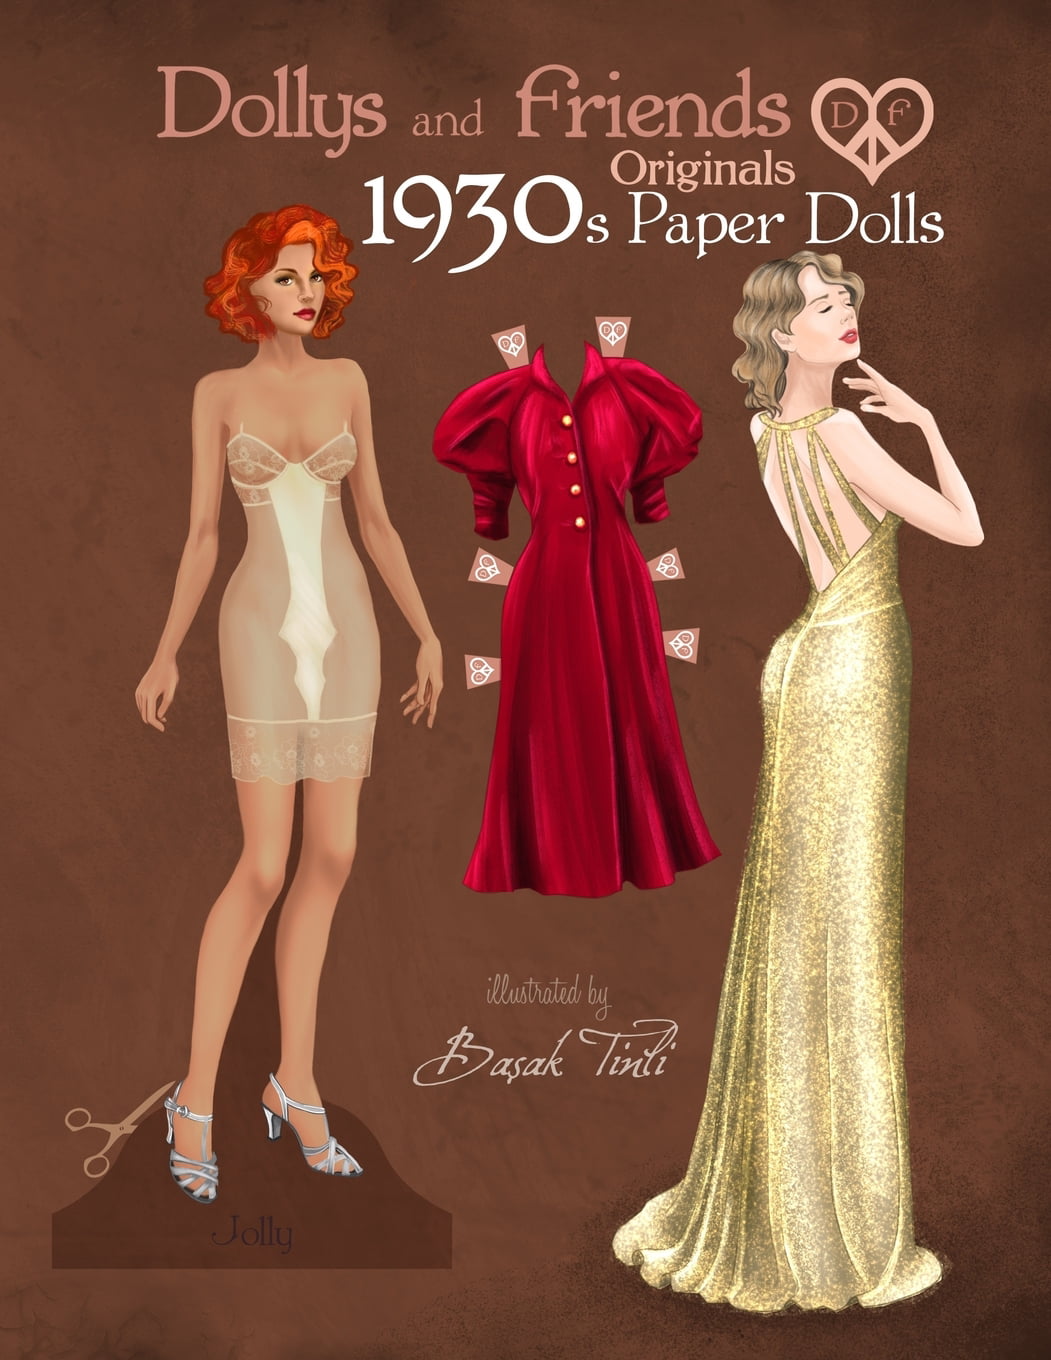 where can i buy paper dolls